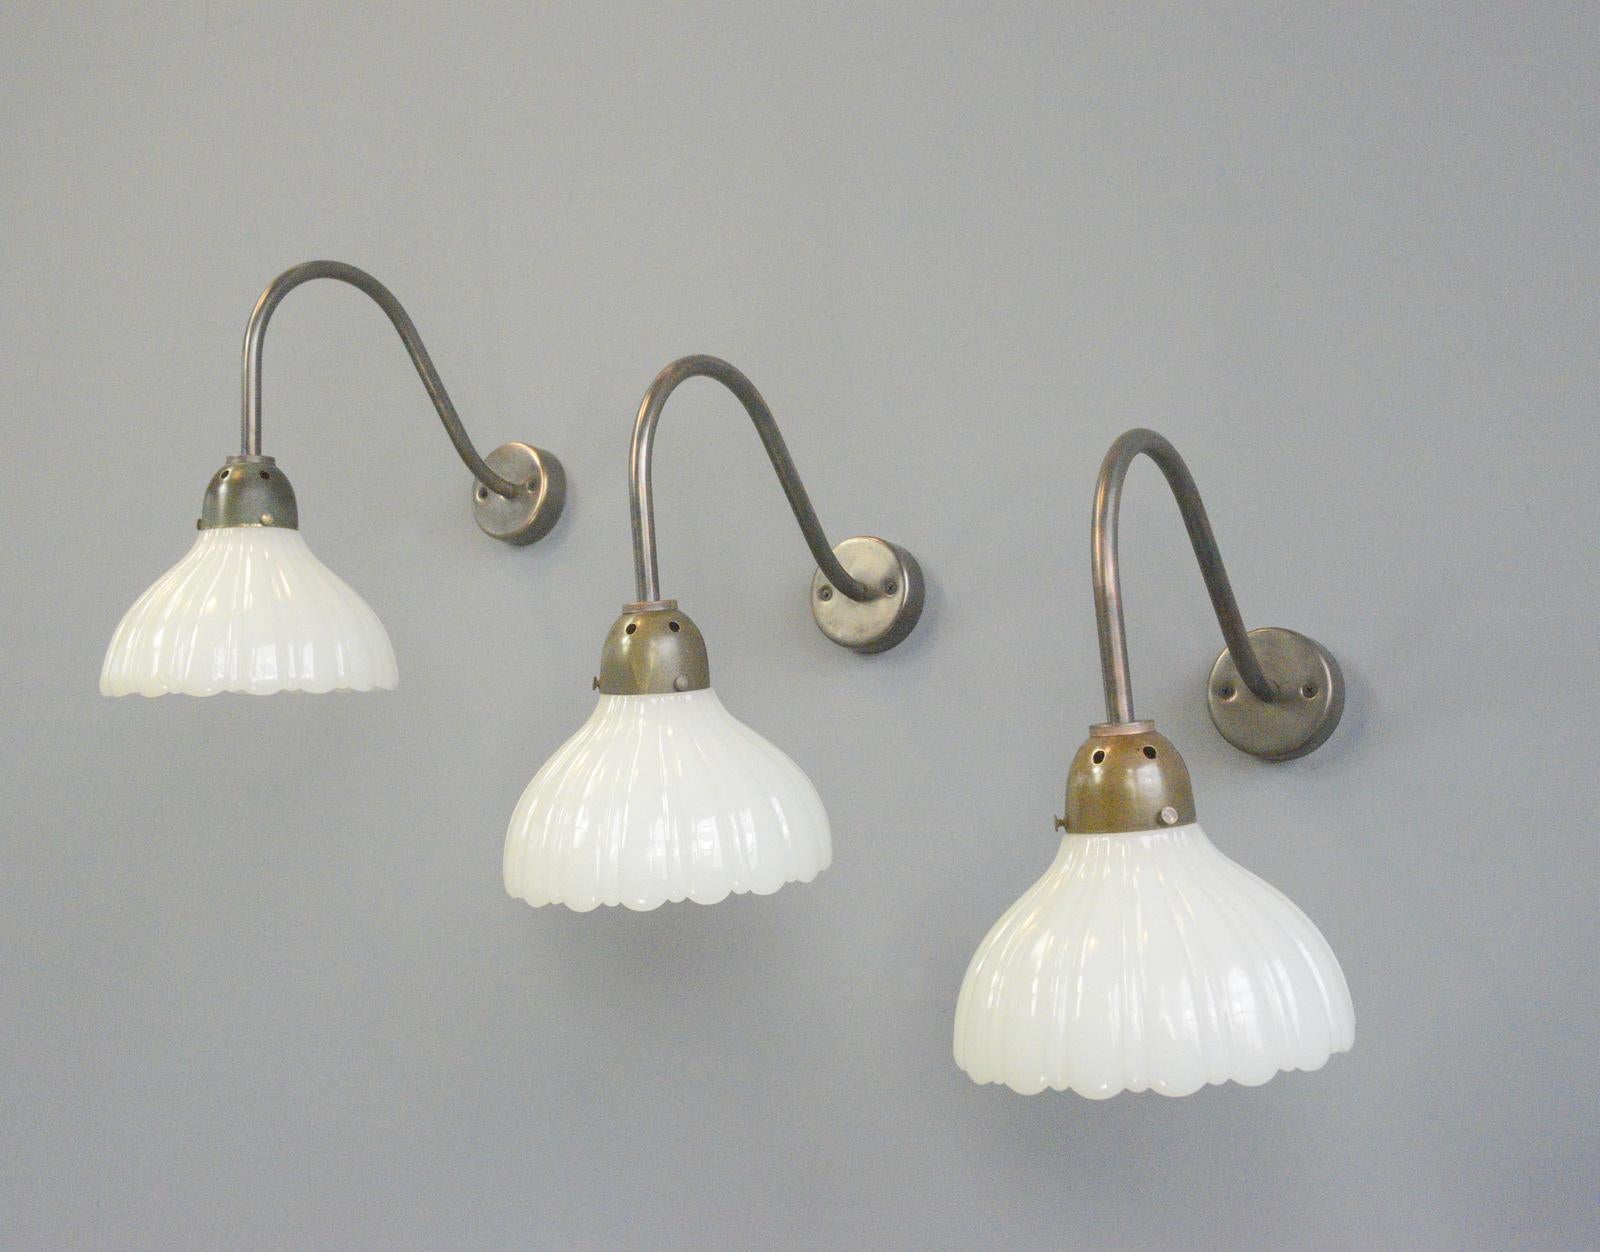 Jefferson moonstone wall lights Circa 1910.

- Heavy opaline glass shades
- Copper tops and brackets
- Takes E27 fitting bulbs
- Wires directly into the wall feed
- English ~ 1910
- 19cm wide x 32cm deep x 34cm tall

Condition